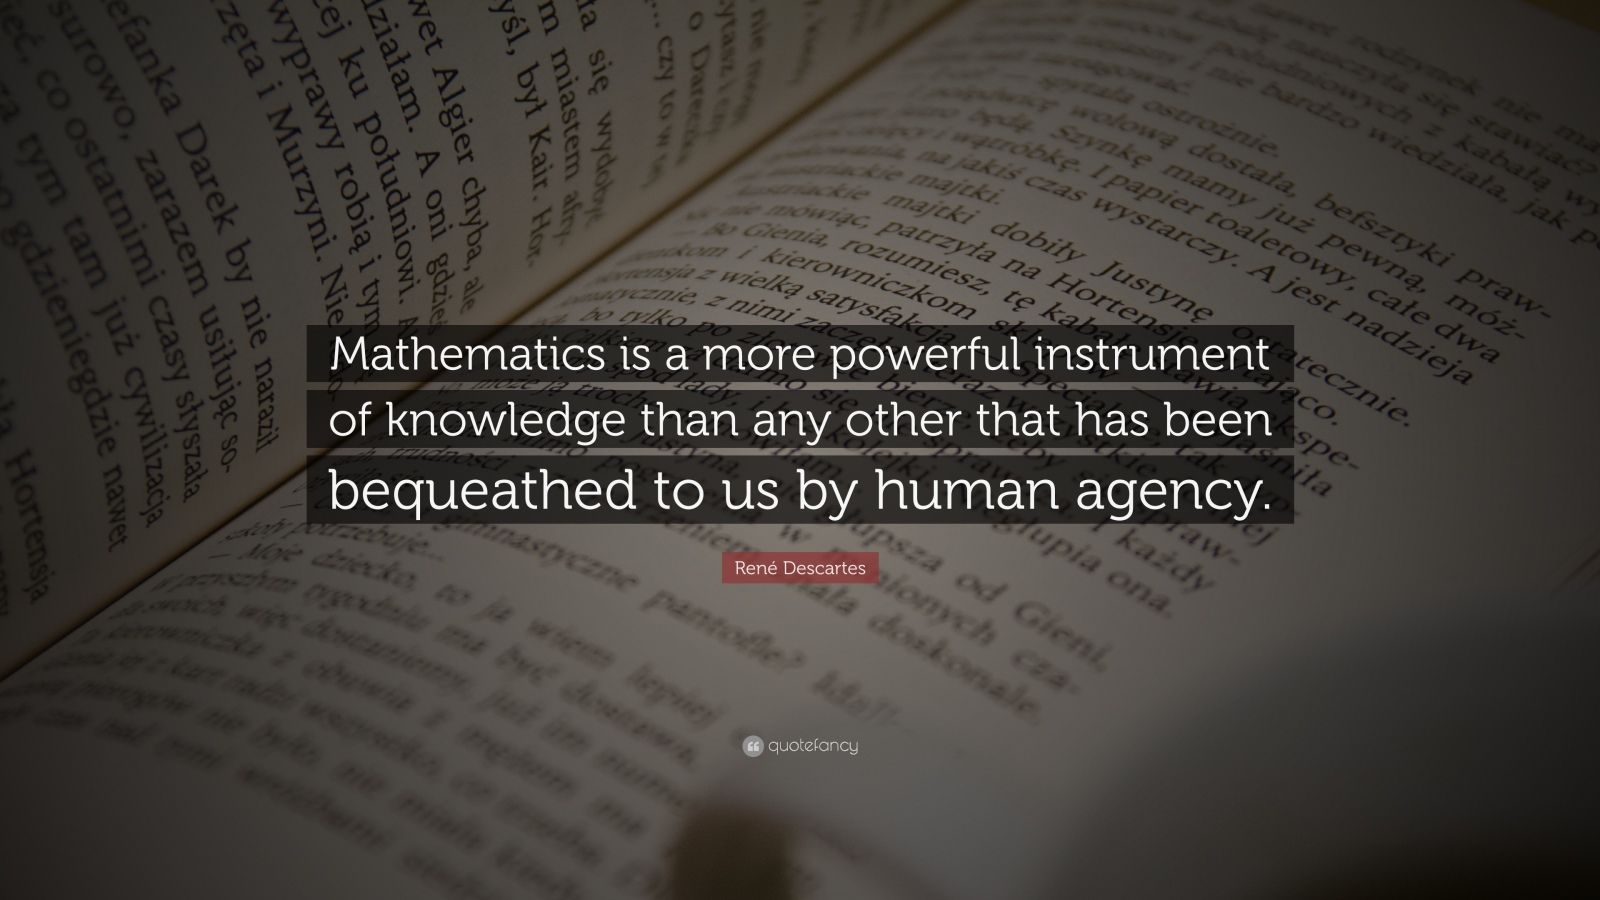 Top 40 Math Quotes | 2021 Edition | Free Images - QuoteFancy